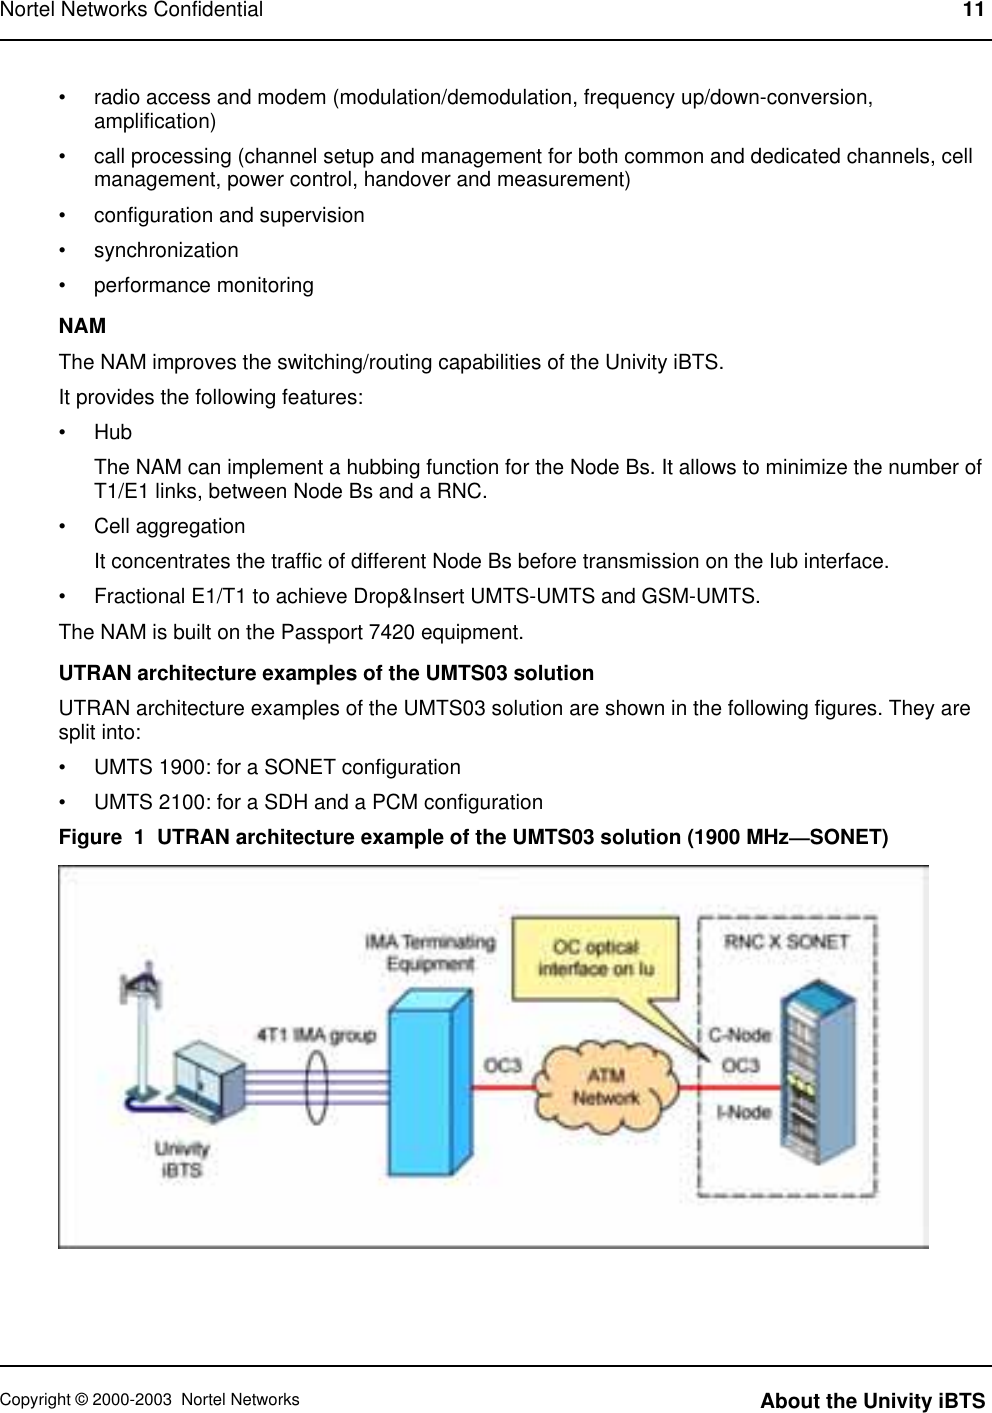 • radio access and modem (modulation/demodulation, frequency up/down-conversion,amplification)• call processing (channel setup and management for both common and dedicated channels, cellmanagement, power control, handover and measurement)• configuration and supervision• synchronization• performance monitoringNAMThe NAM improves the switching/routing capabilities of the Univity iBTS.It provides the following features:• HubThe NAM can implement a hubbing function for the Node Bs. It allows to minimize the number ofT1/E1 links, between Node Bs and a RNC.• Cell aggregationIt concentrates the traffic of different Node Bs before transmission on the Iub interface.• Fractional E1/T1 to achieve Drop&amp;Insert UMTS-UMTS and GSM-UMTS.The NAM is built on the Passport 7420 equipment.UTRAN architecture examples of the UMTS03 solutionUTRAN architecture examples of the UMTS03 solution are shown in the following figures. They aresplit into:• UMTS 1900: for a SONET configuration• UMTS 2100: for a SDH and a PCM configurationFigure 1 UTRAN architecture example of the UMTS03 solution (1900 MHz—SONET)Nortel Networks Confidential 11Copyright © 2000-2003 Nortel Networks About the Univity iBTS